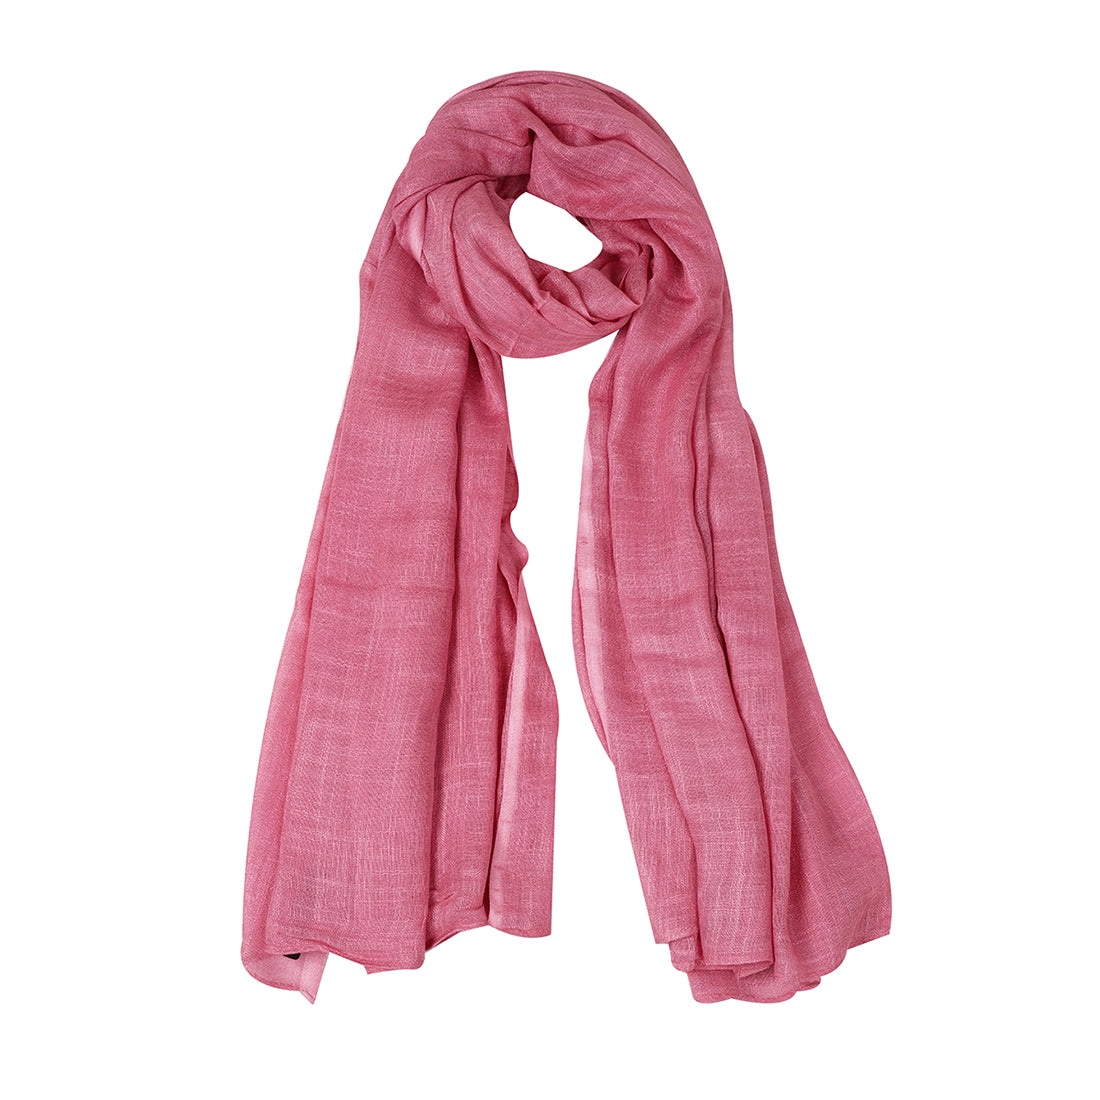 CONTEMPORARY SOLID PLAIN STOLE SCARF